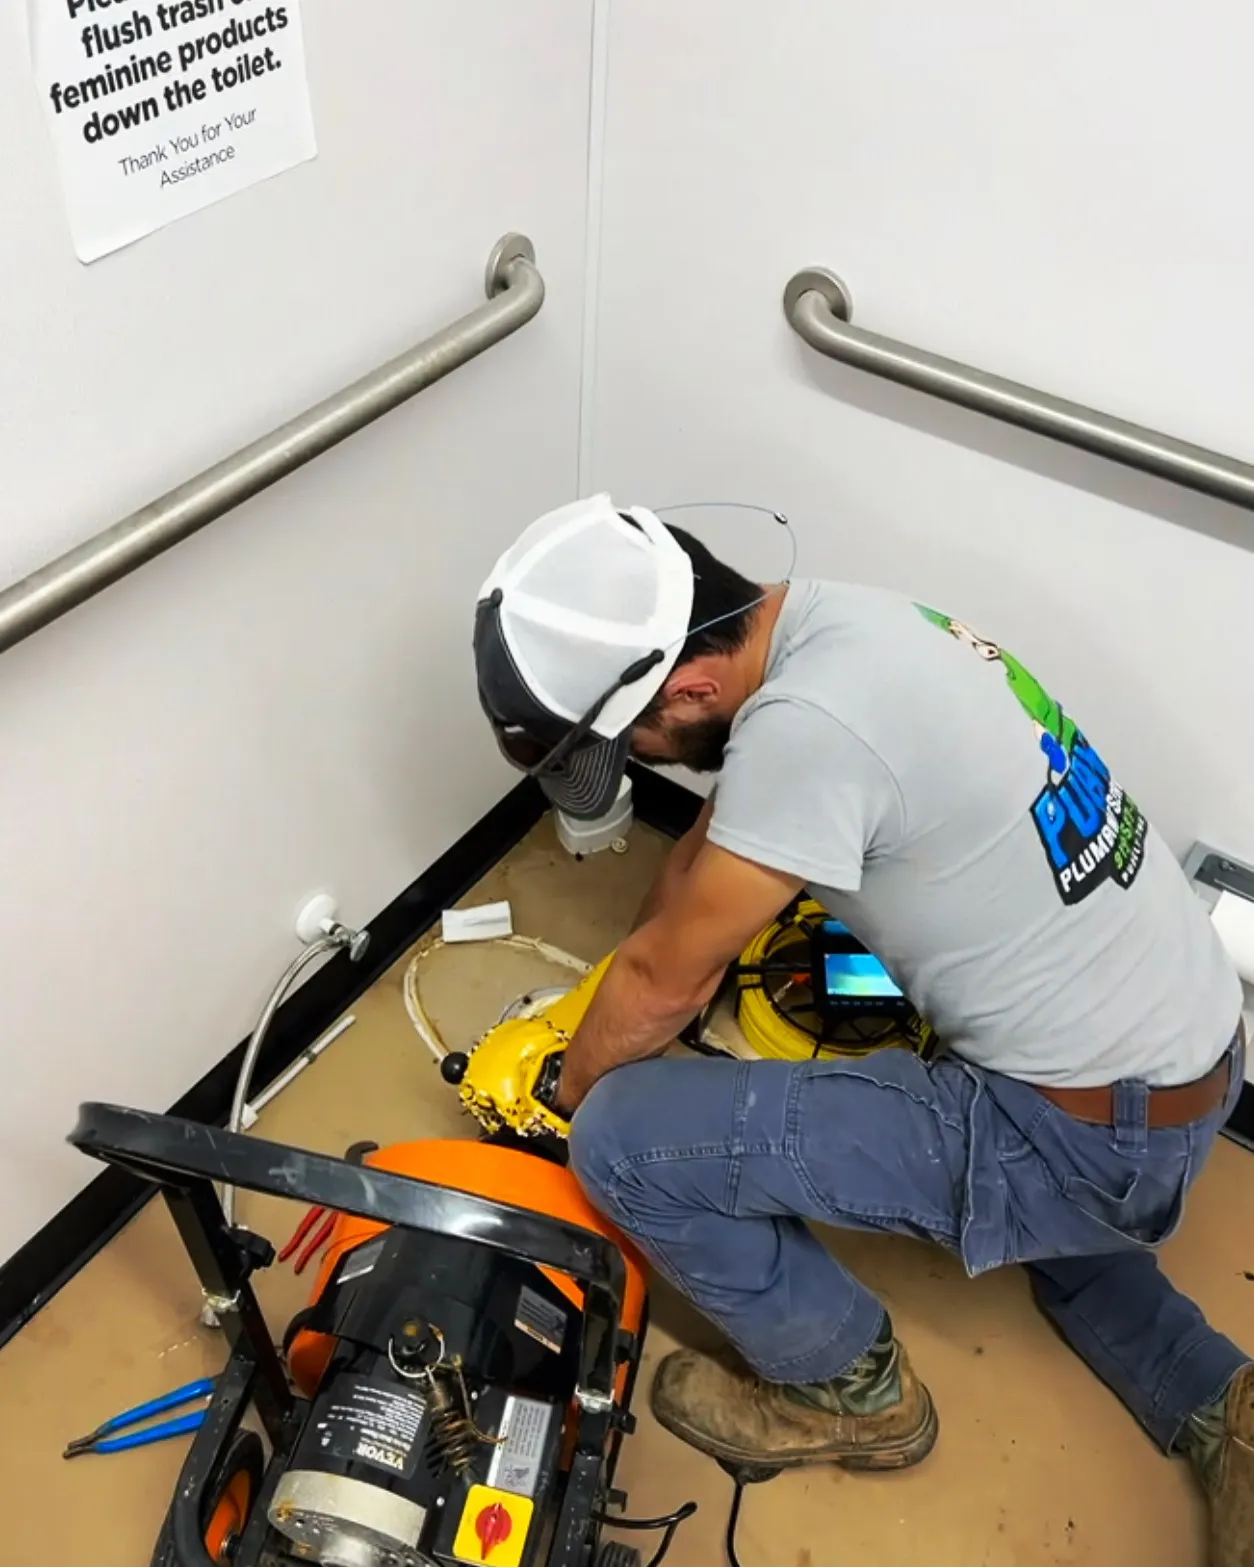 Plumbing Repairs for Purified Plumbing Services INC in Leasburg, NC